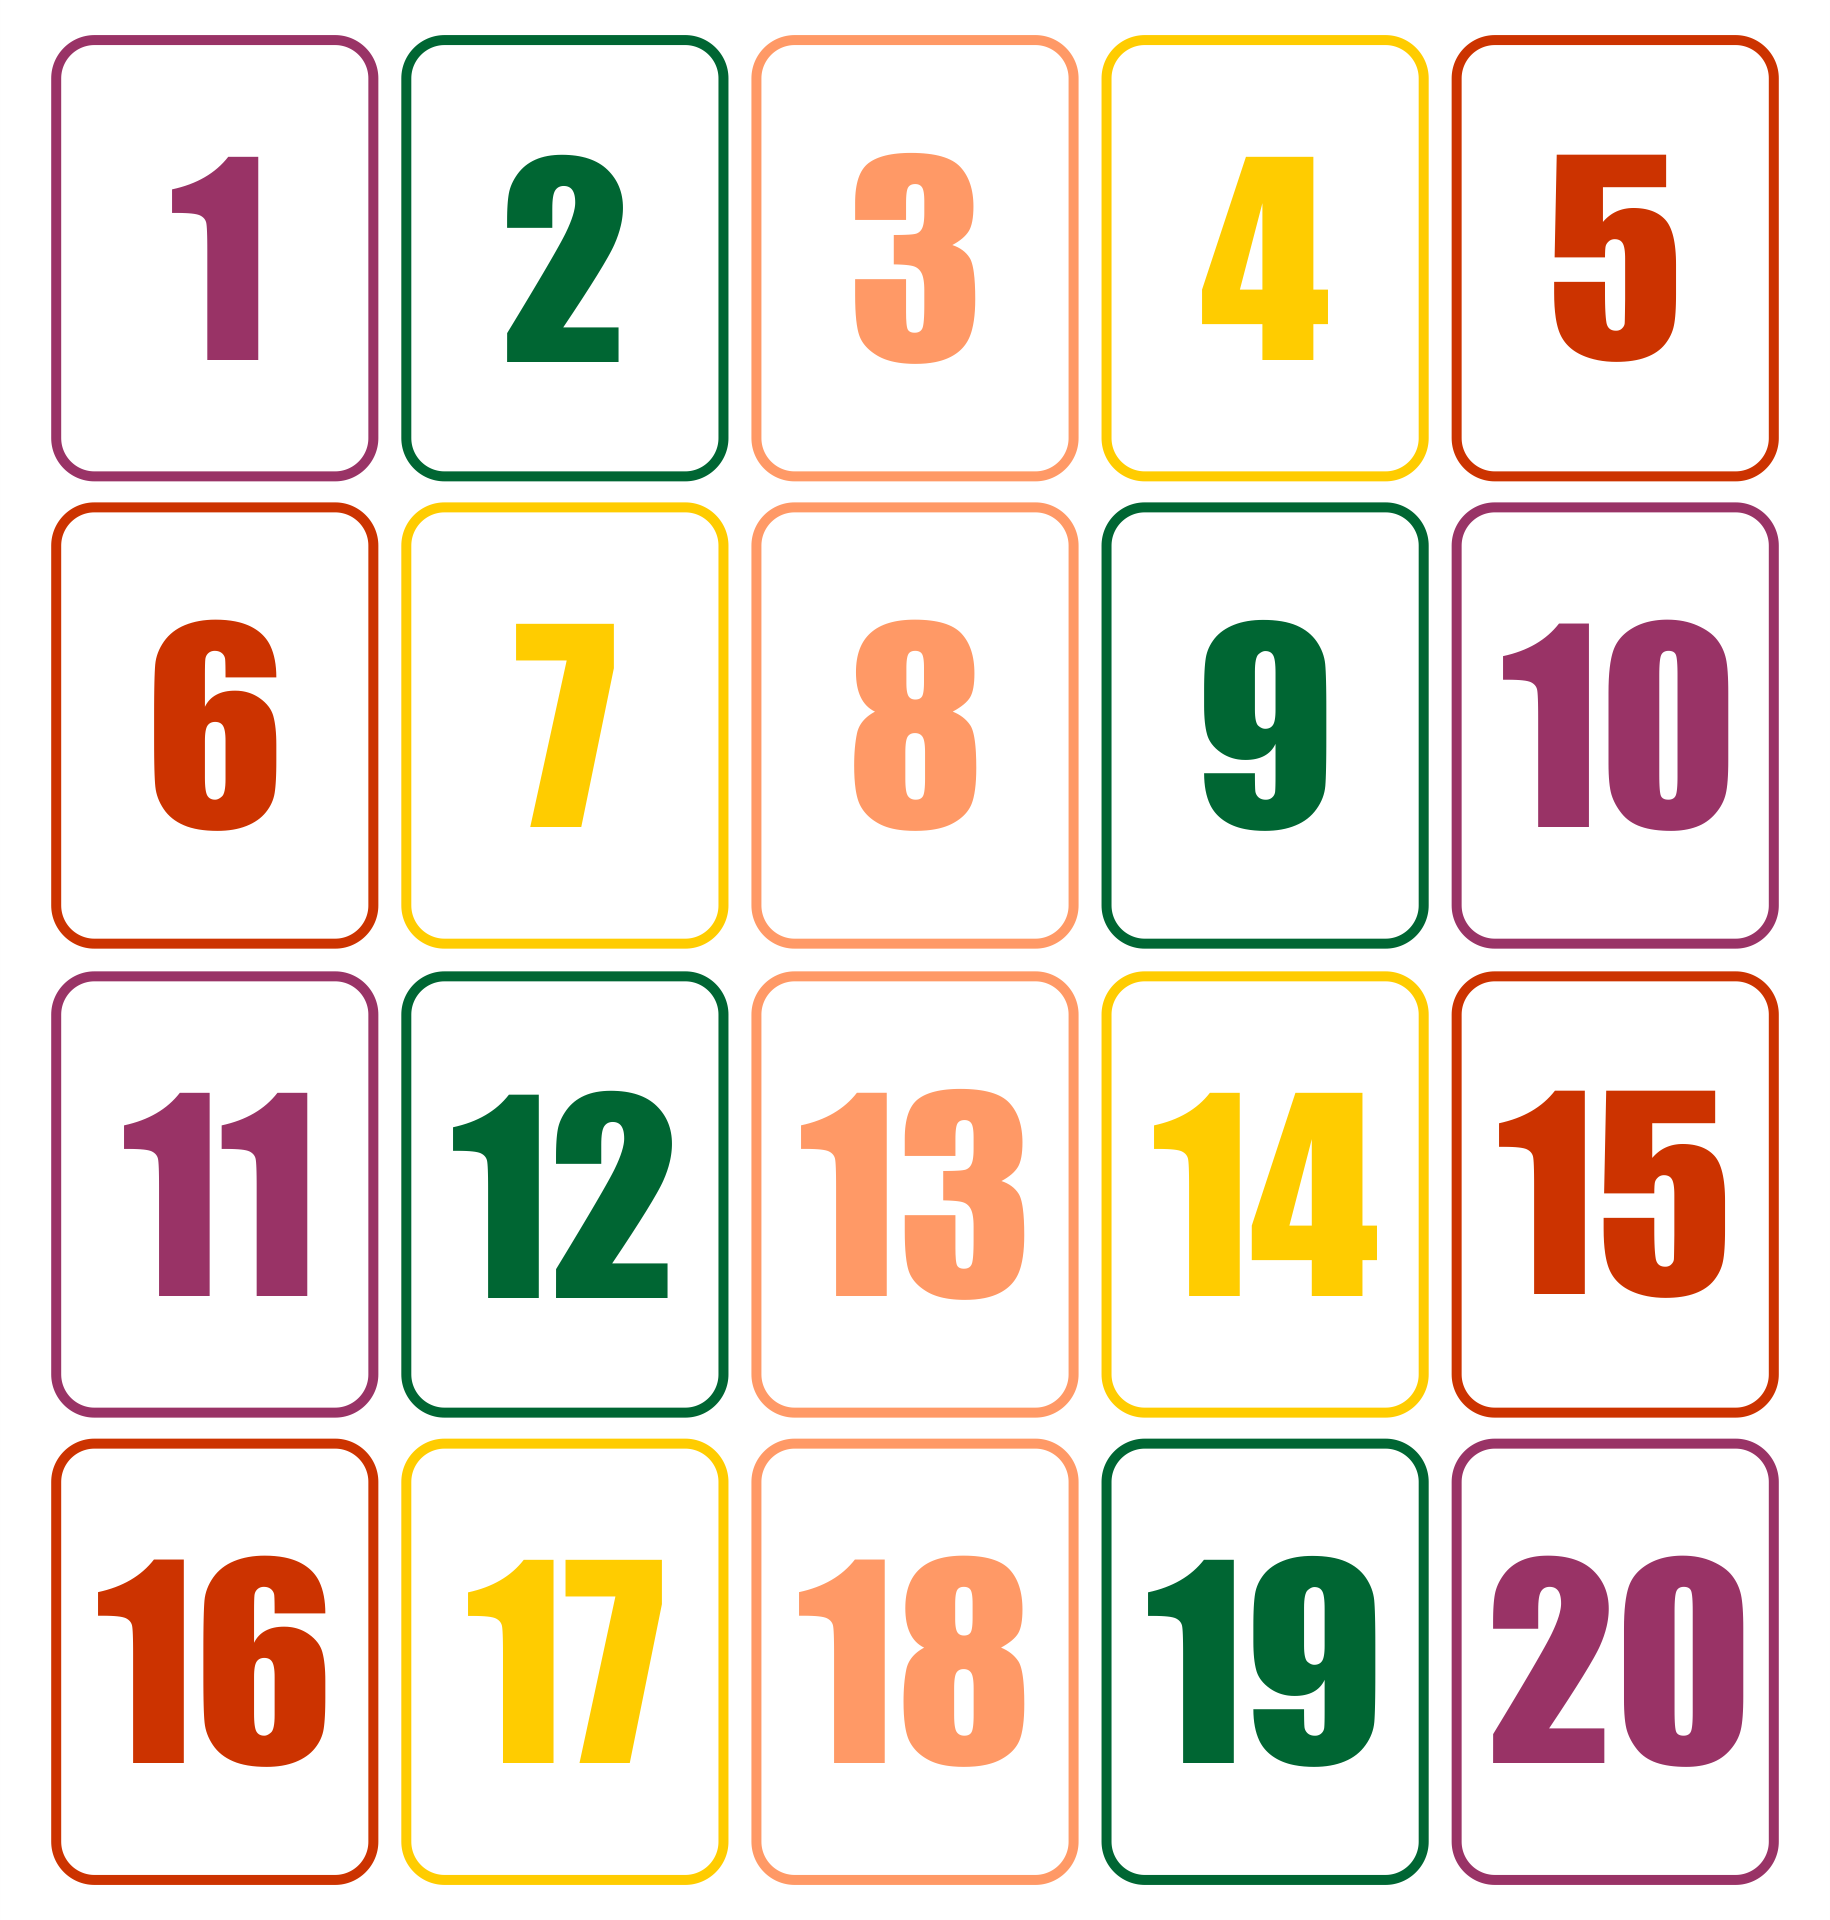 4 Best Images of Large Printable Number Cards 1 20 - Printable Number ...